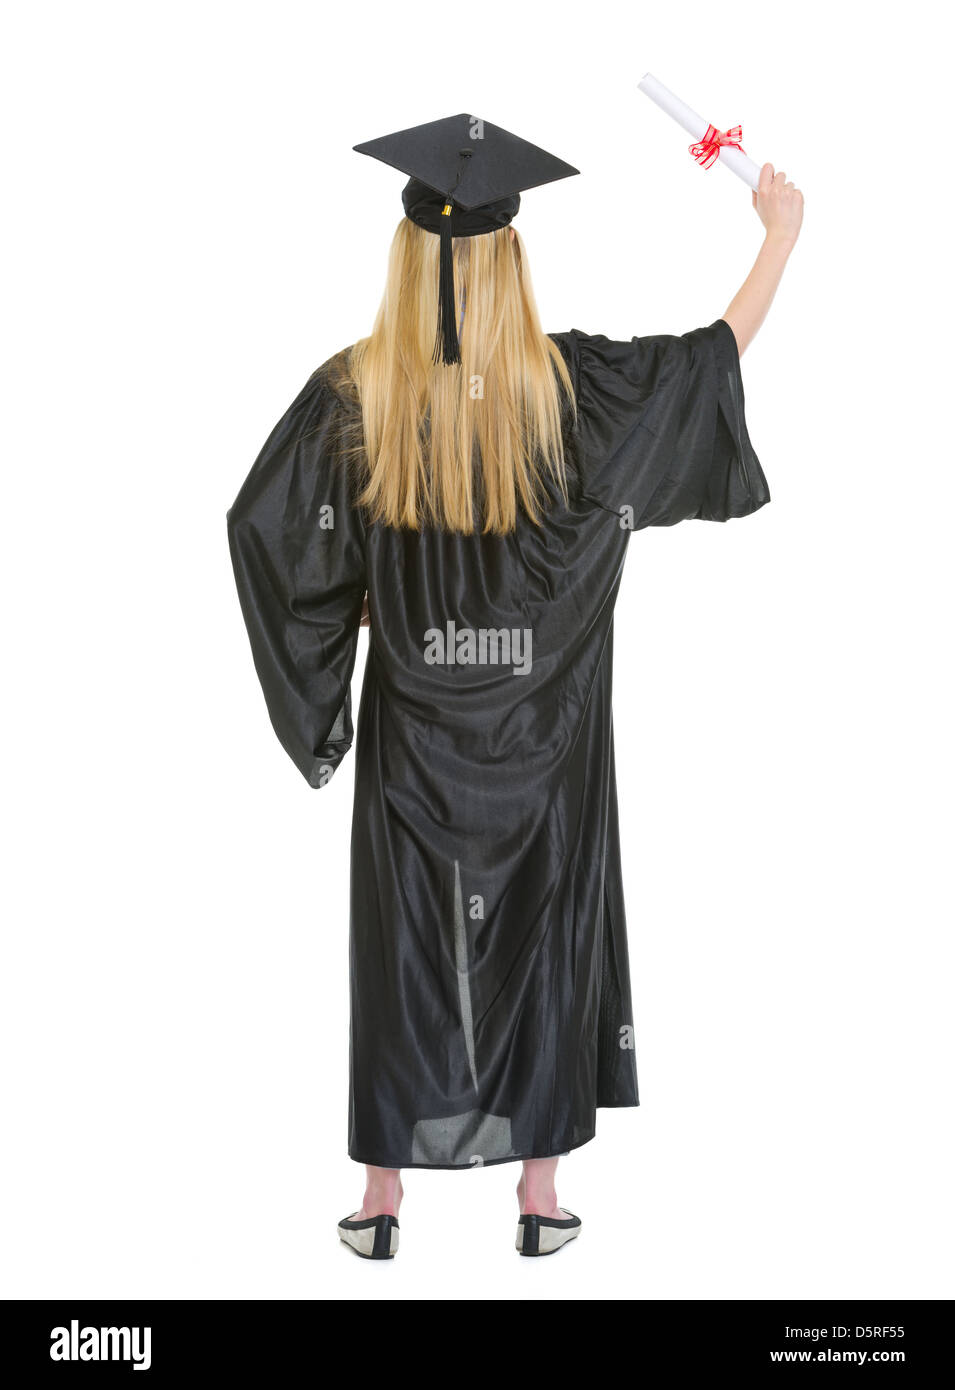 Deluxe Black Doctoral Gown, Tam and Hood Set - GraduatePro